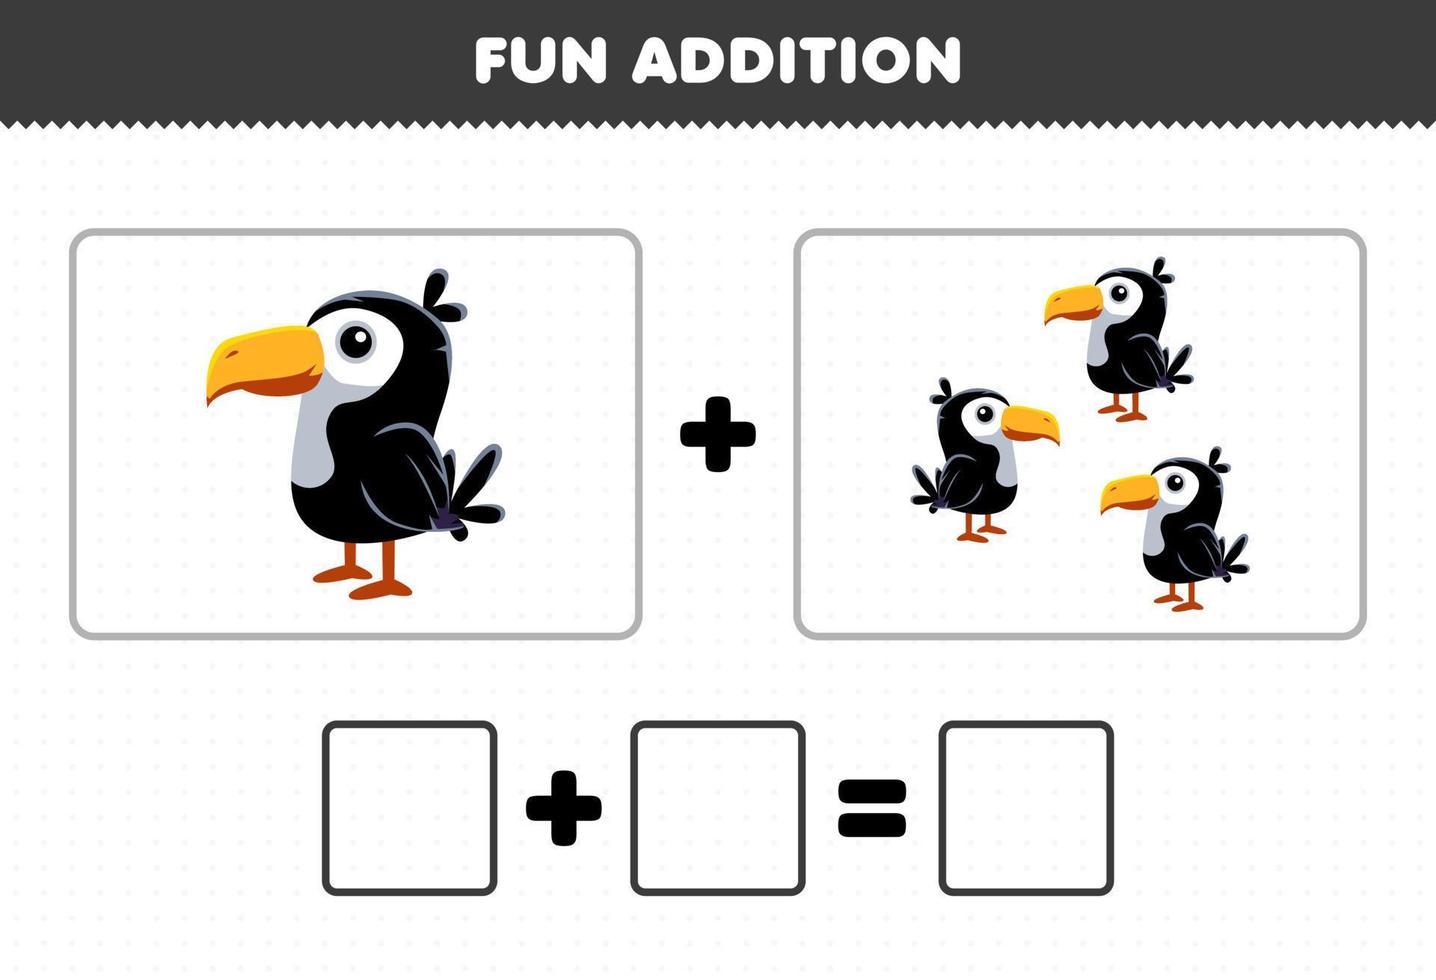 Education game for children fun addition by counting cute cartoon animal toucan pictures worksheet vector